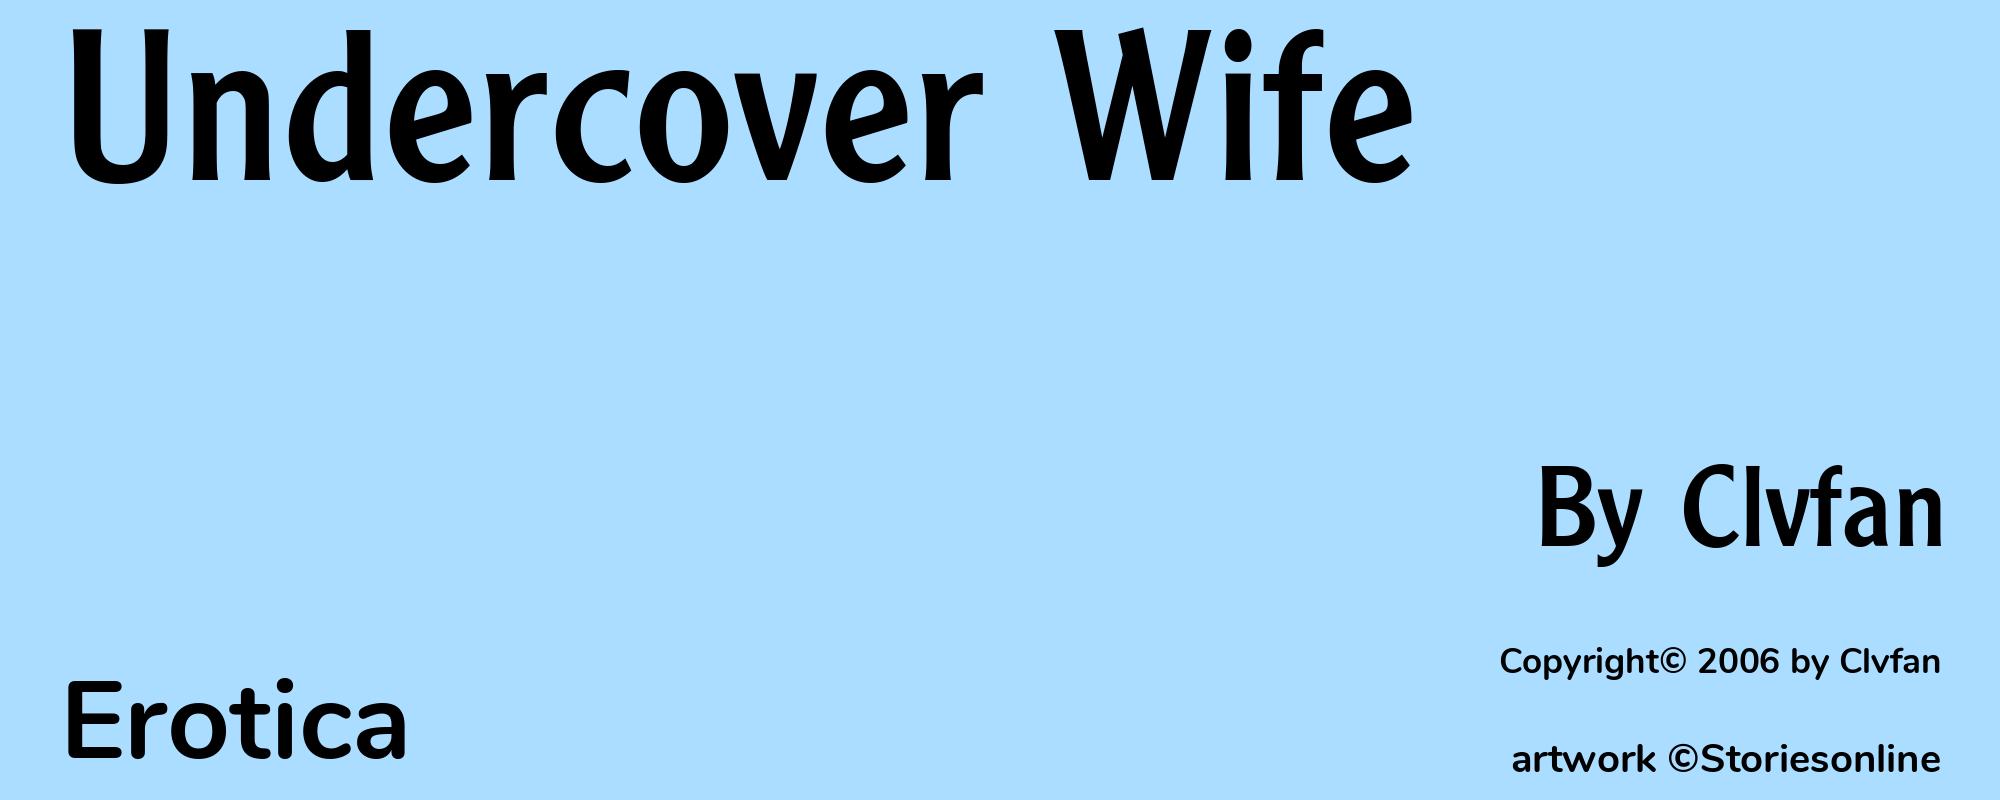 Undercover Wife - Cover